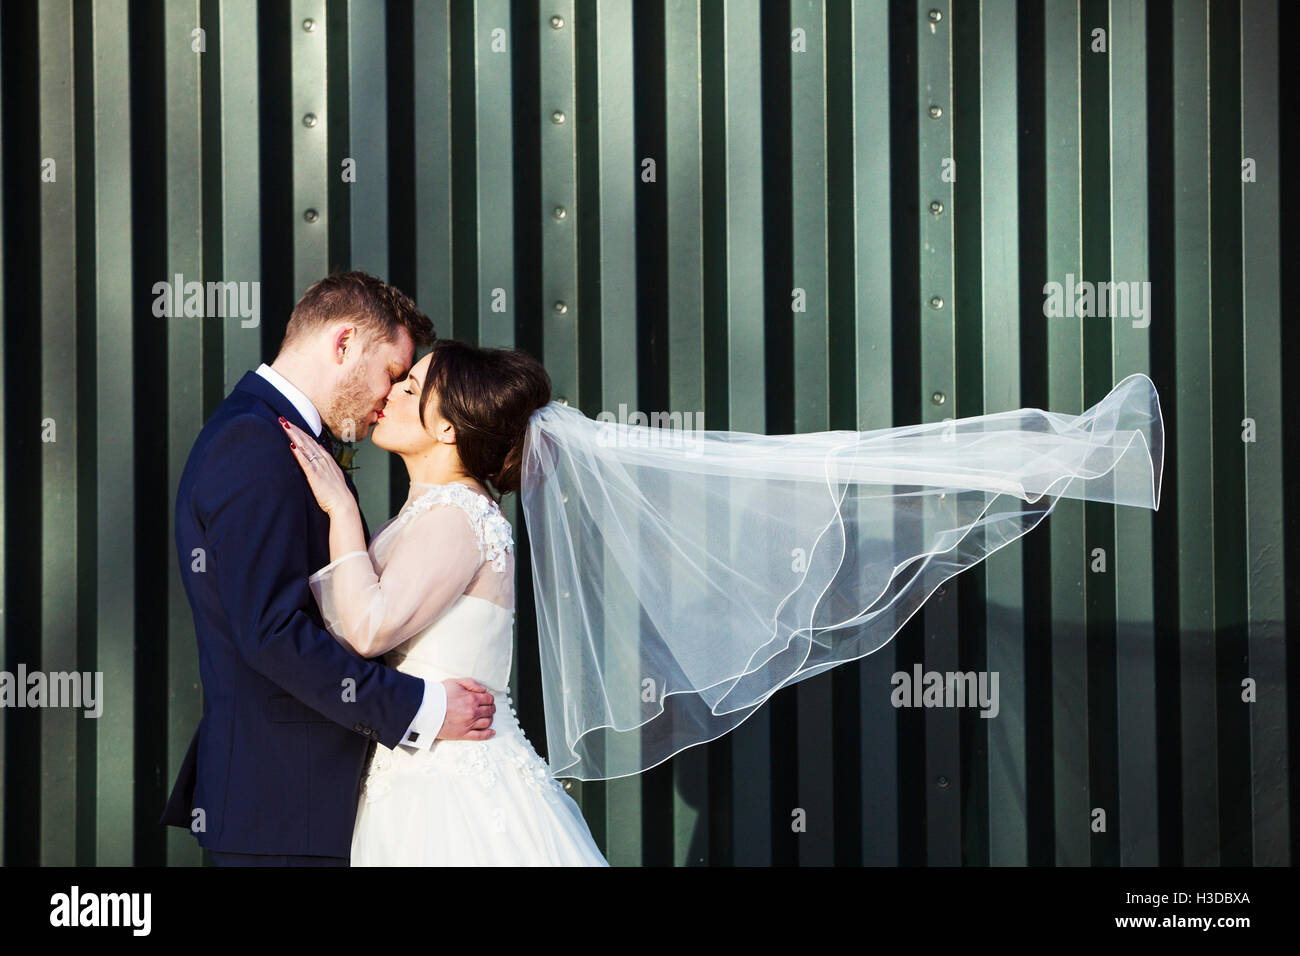 A bride and bridegroom on their wedding day, kissing each other. Stock Photo